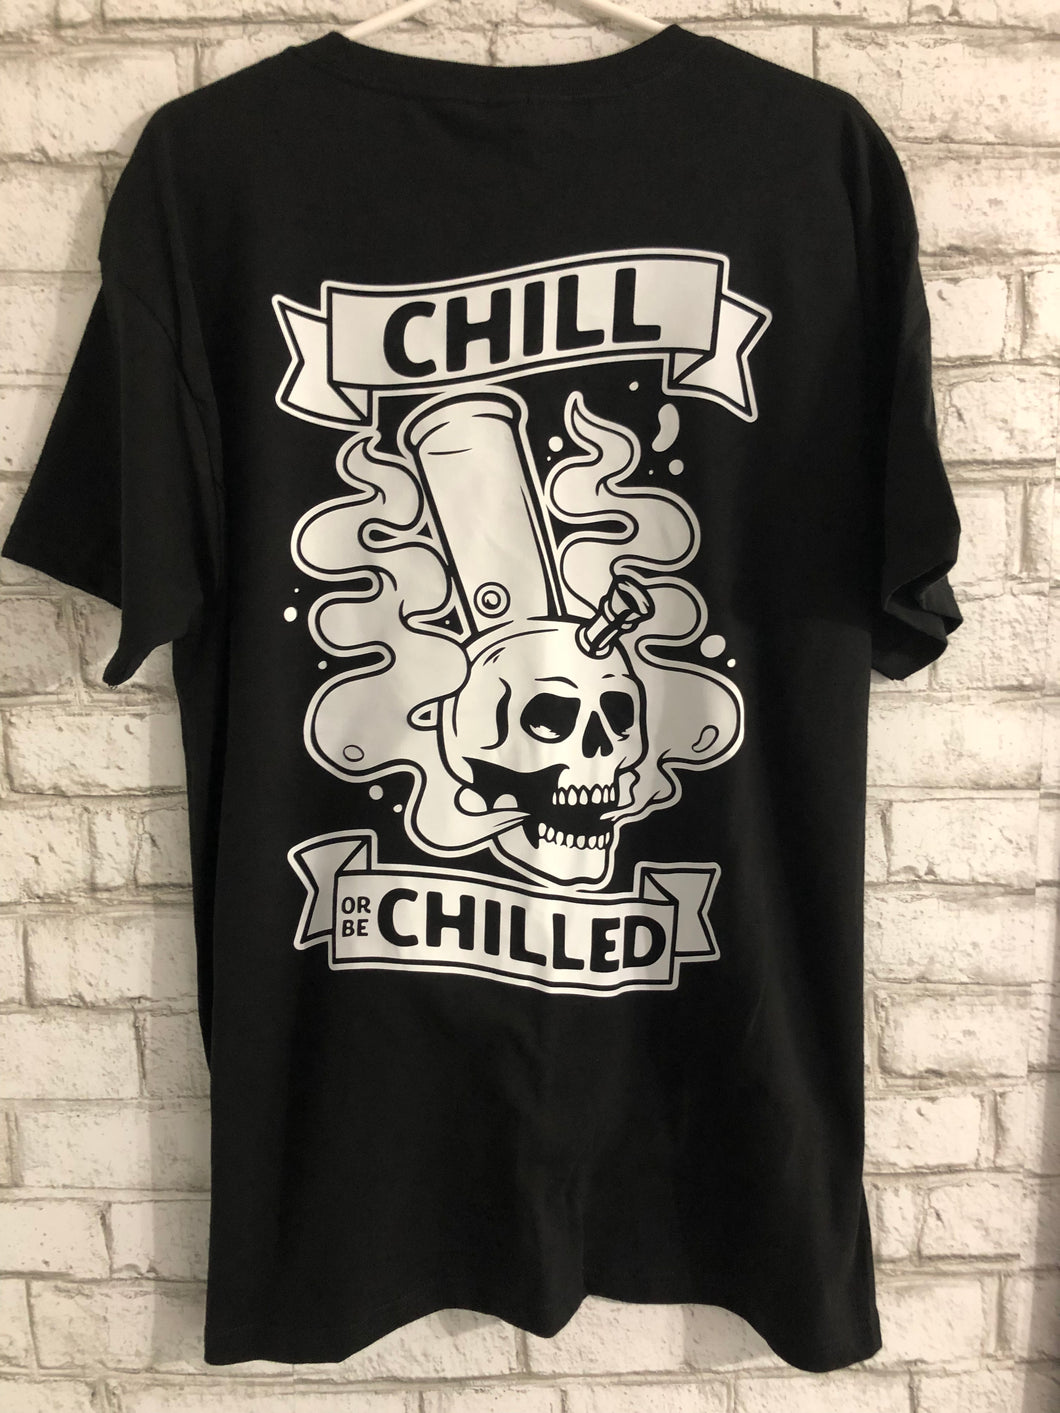 Chill or be Chilled tee